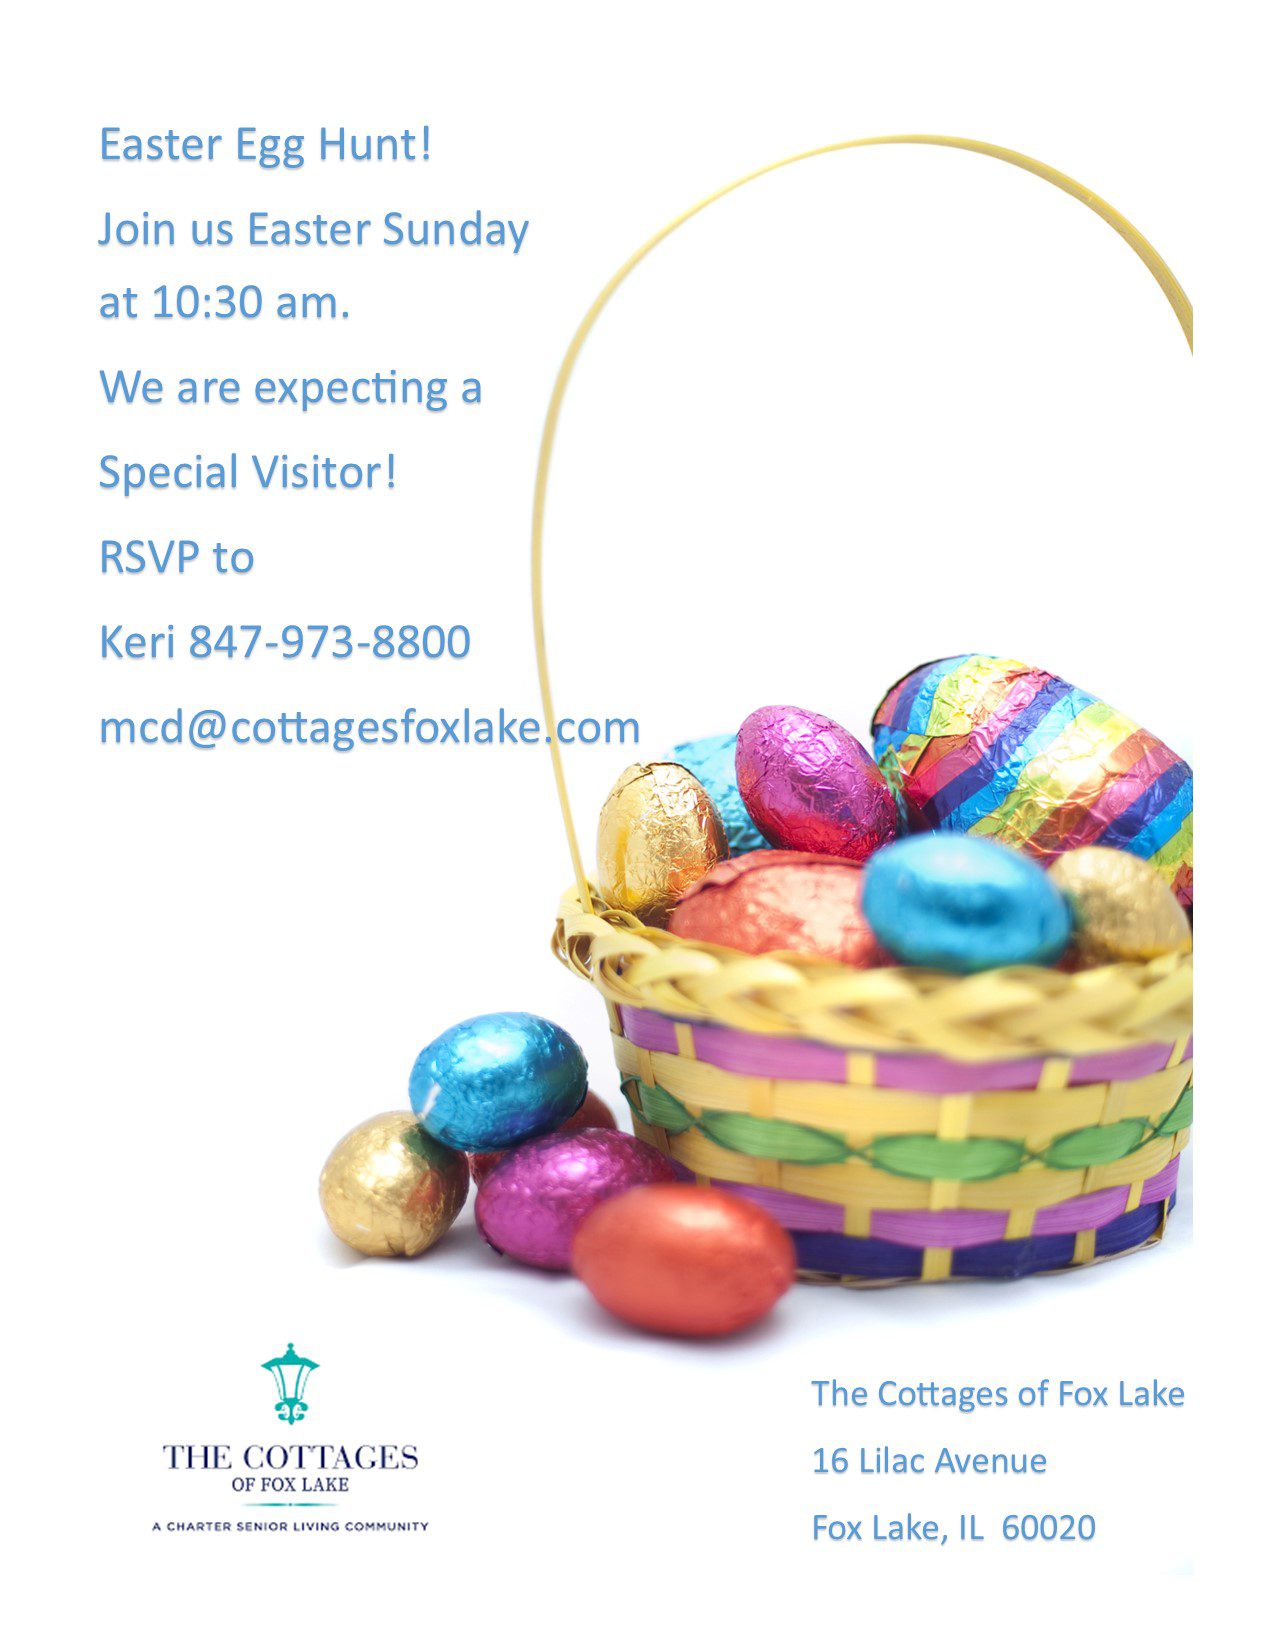 Cottages of Fox Lake - Assisted Living and Memory Care - Easter Egg Hunt